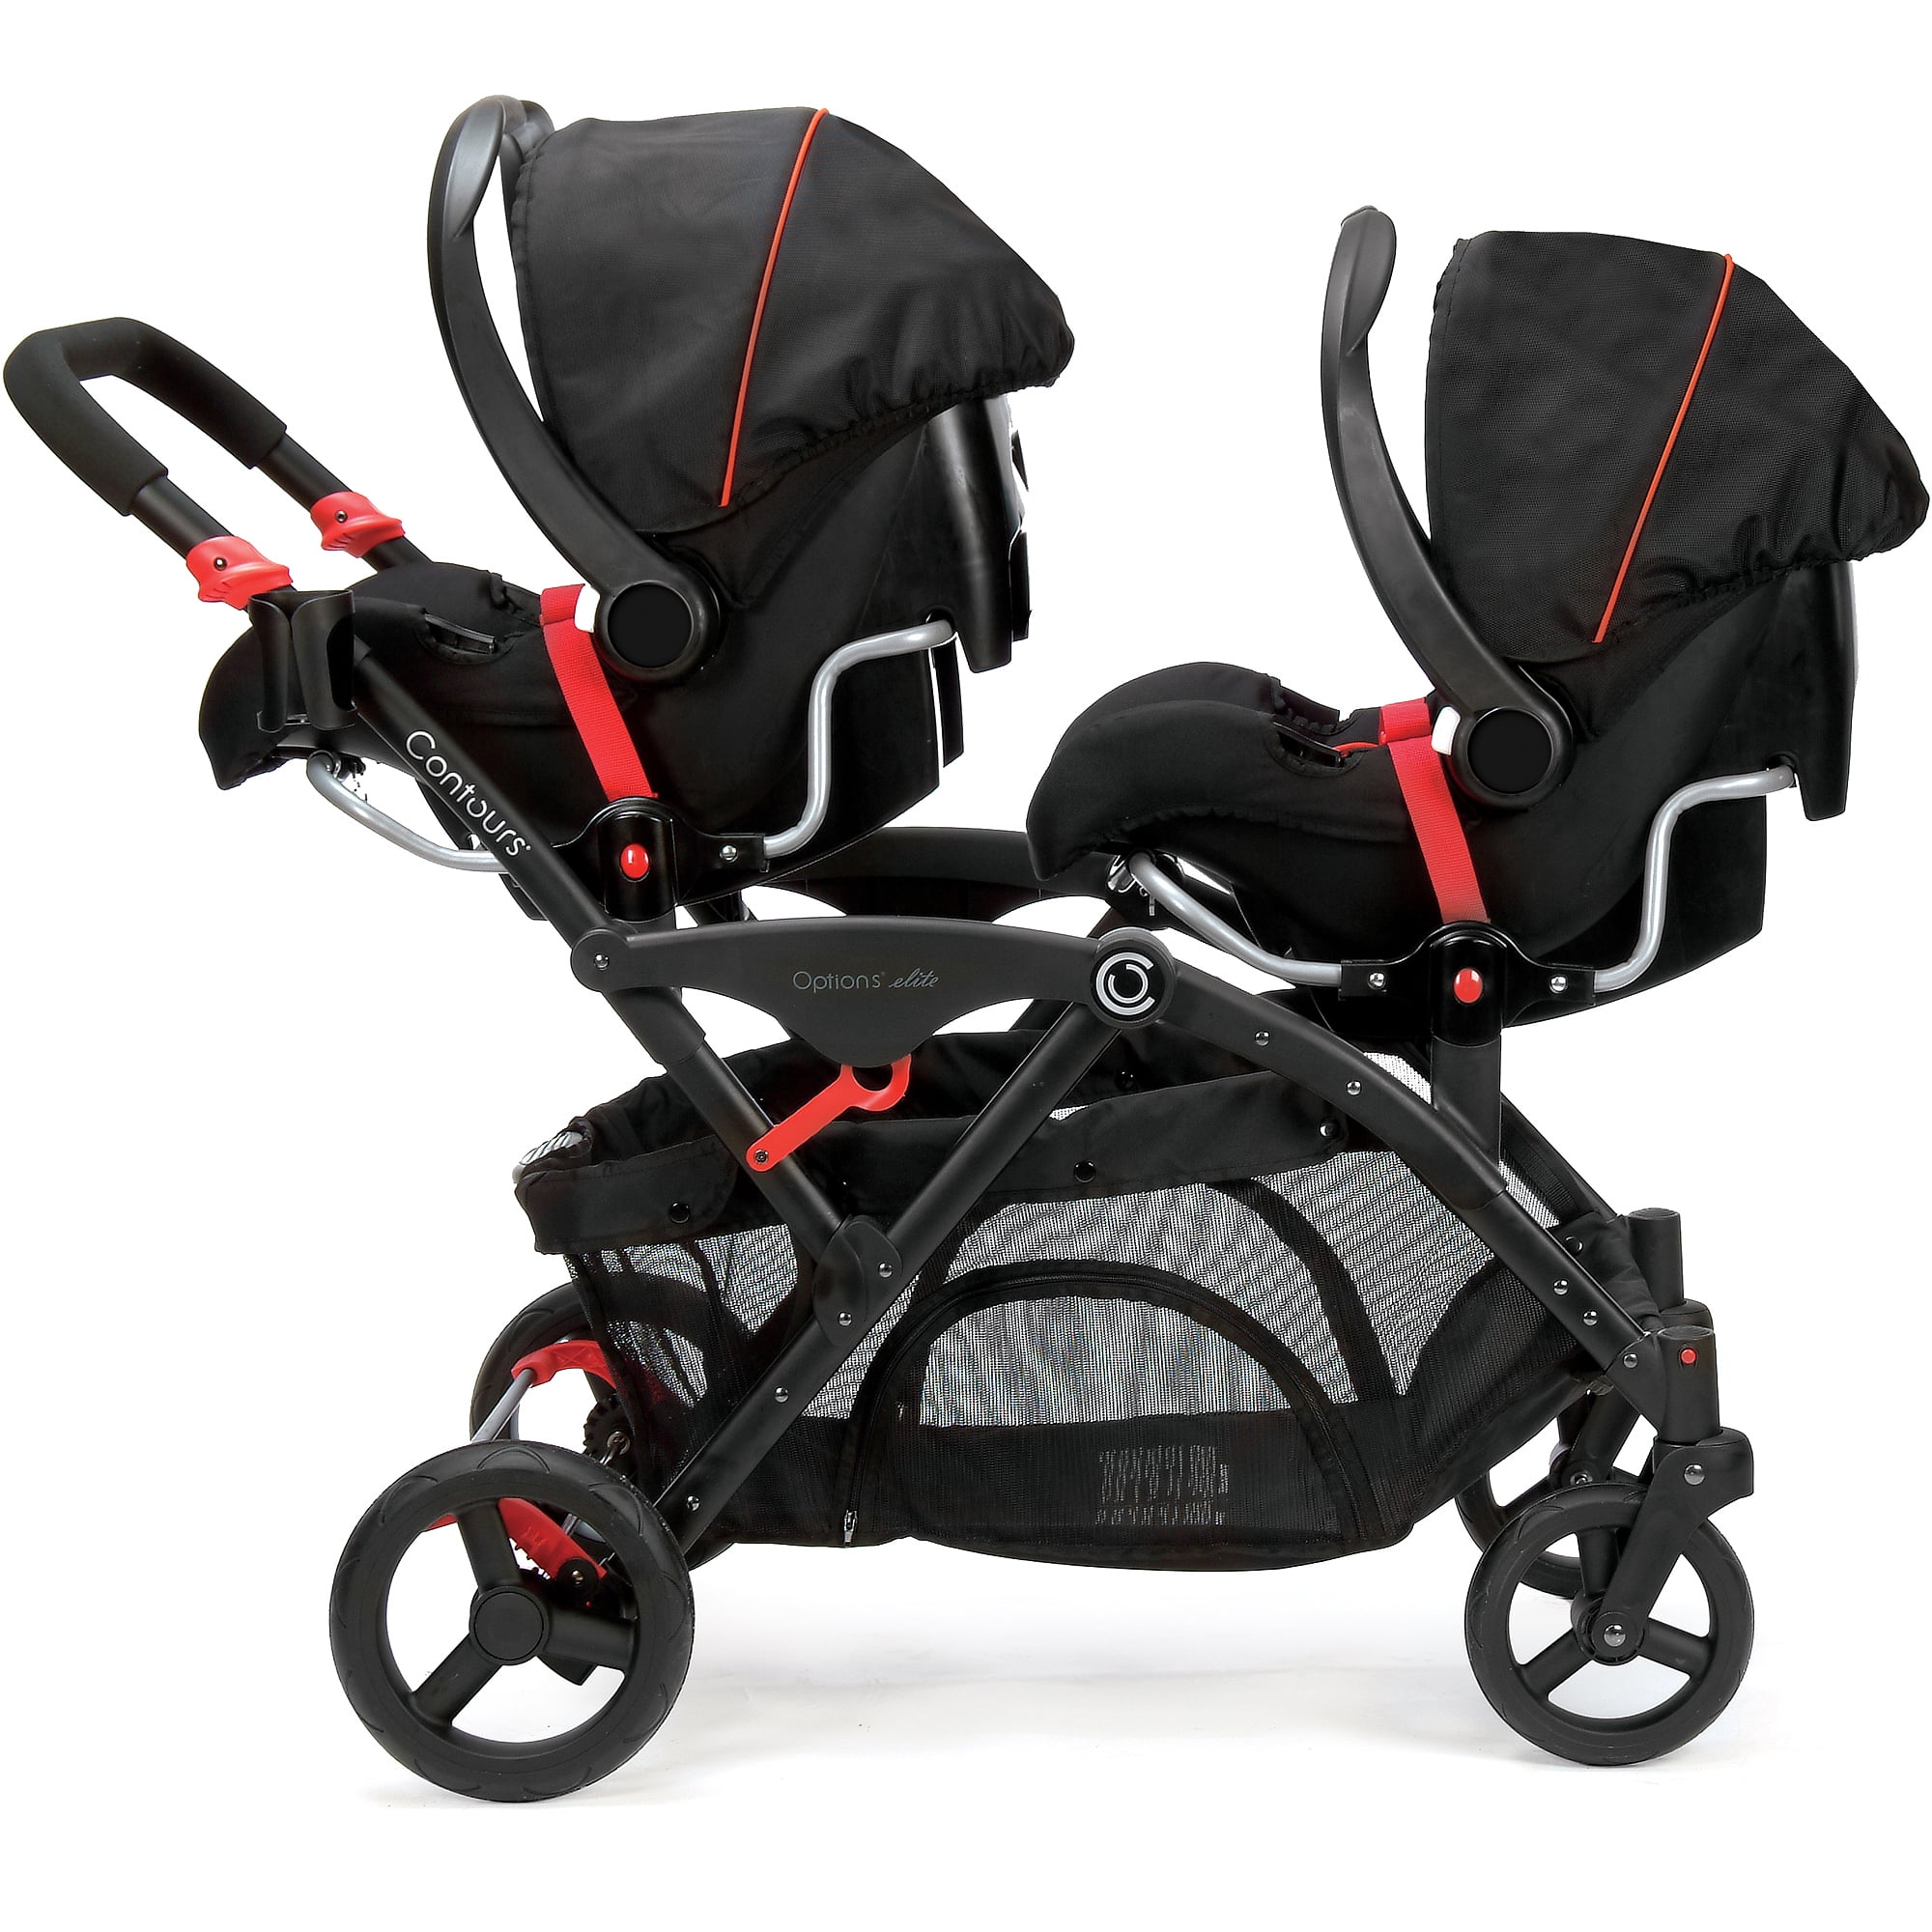 Twin Strollers With Car Seats Included Strollers 2017